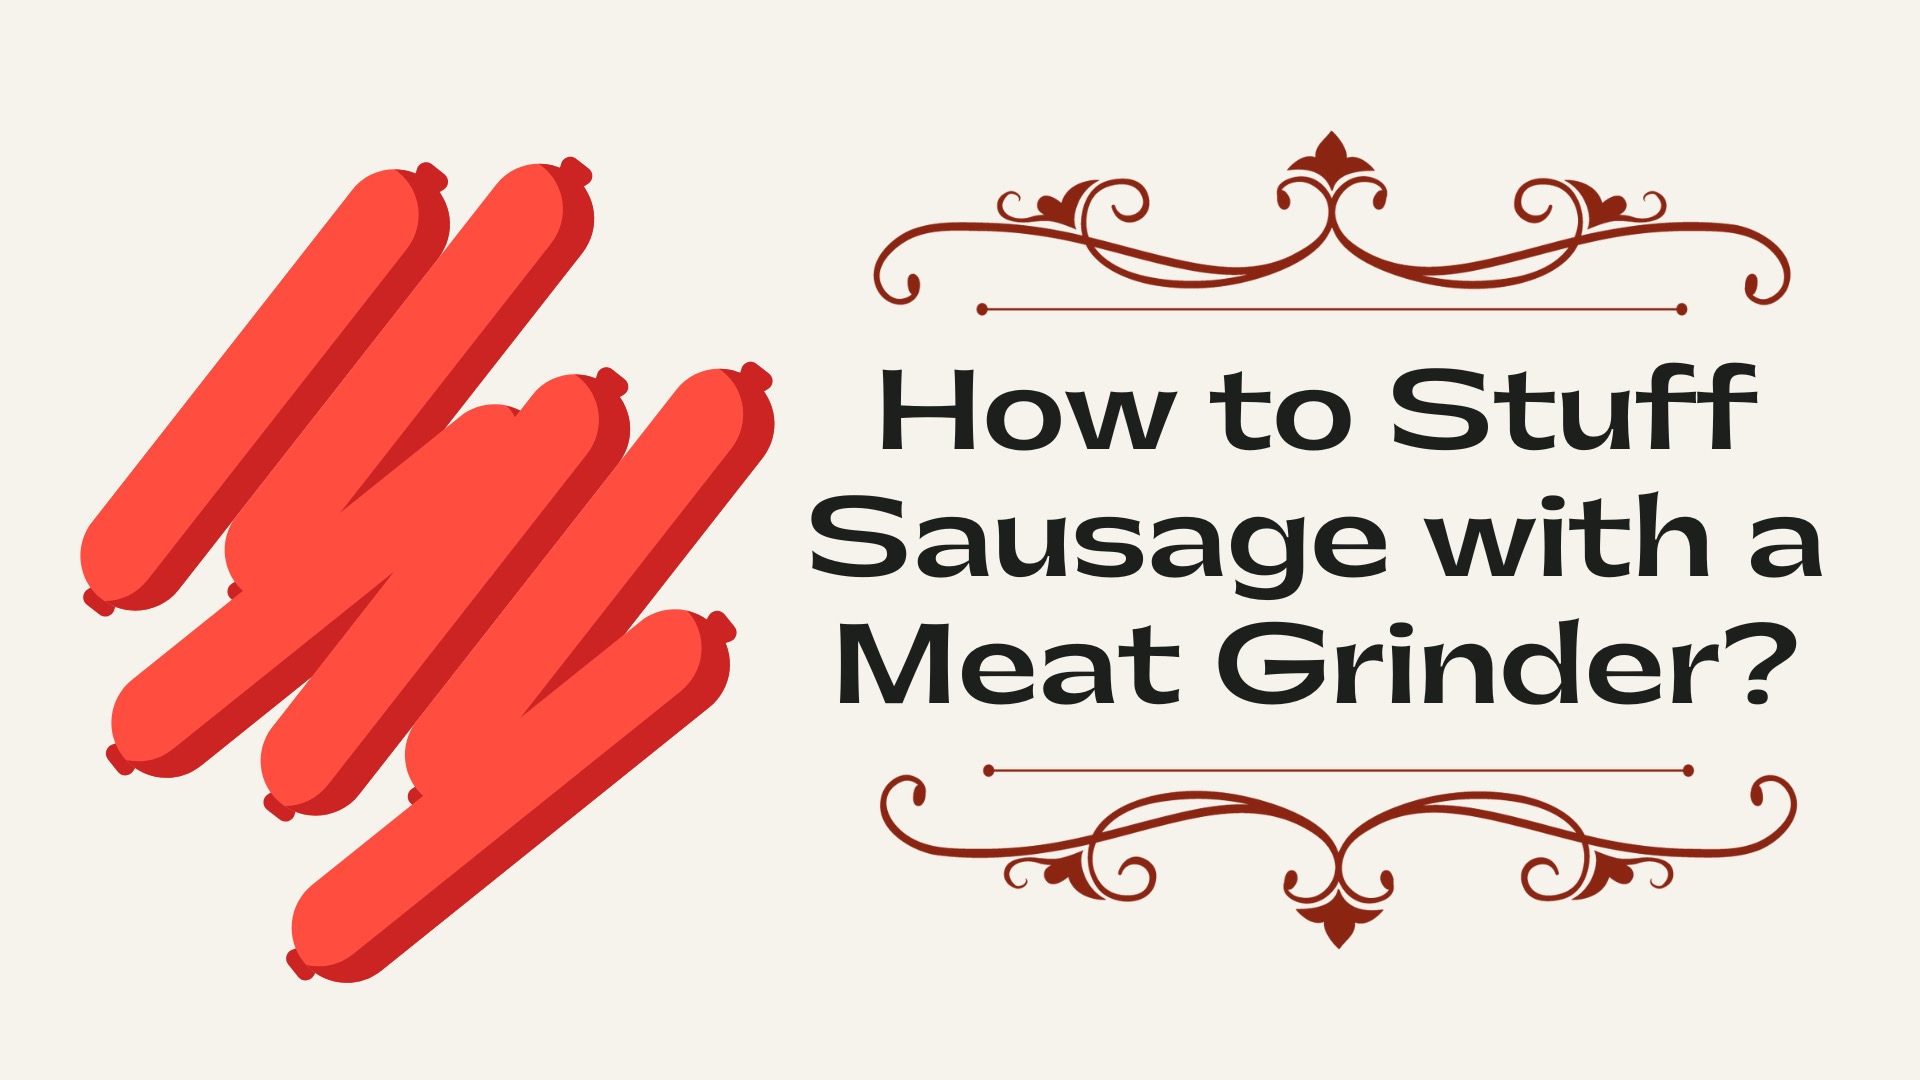 How to Stuff Sausage with a Meat Grinder